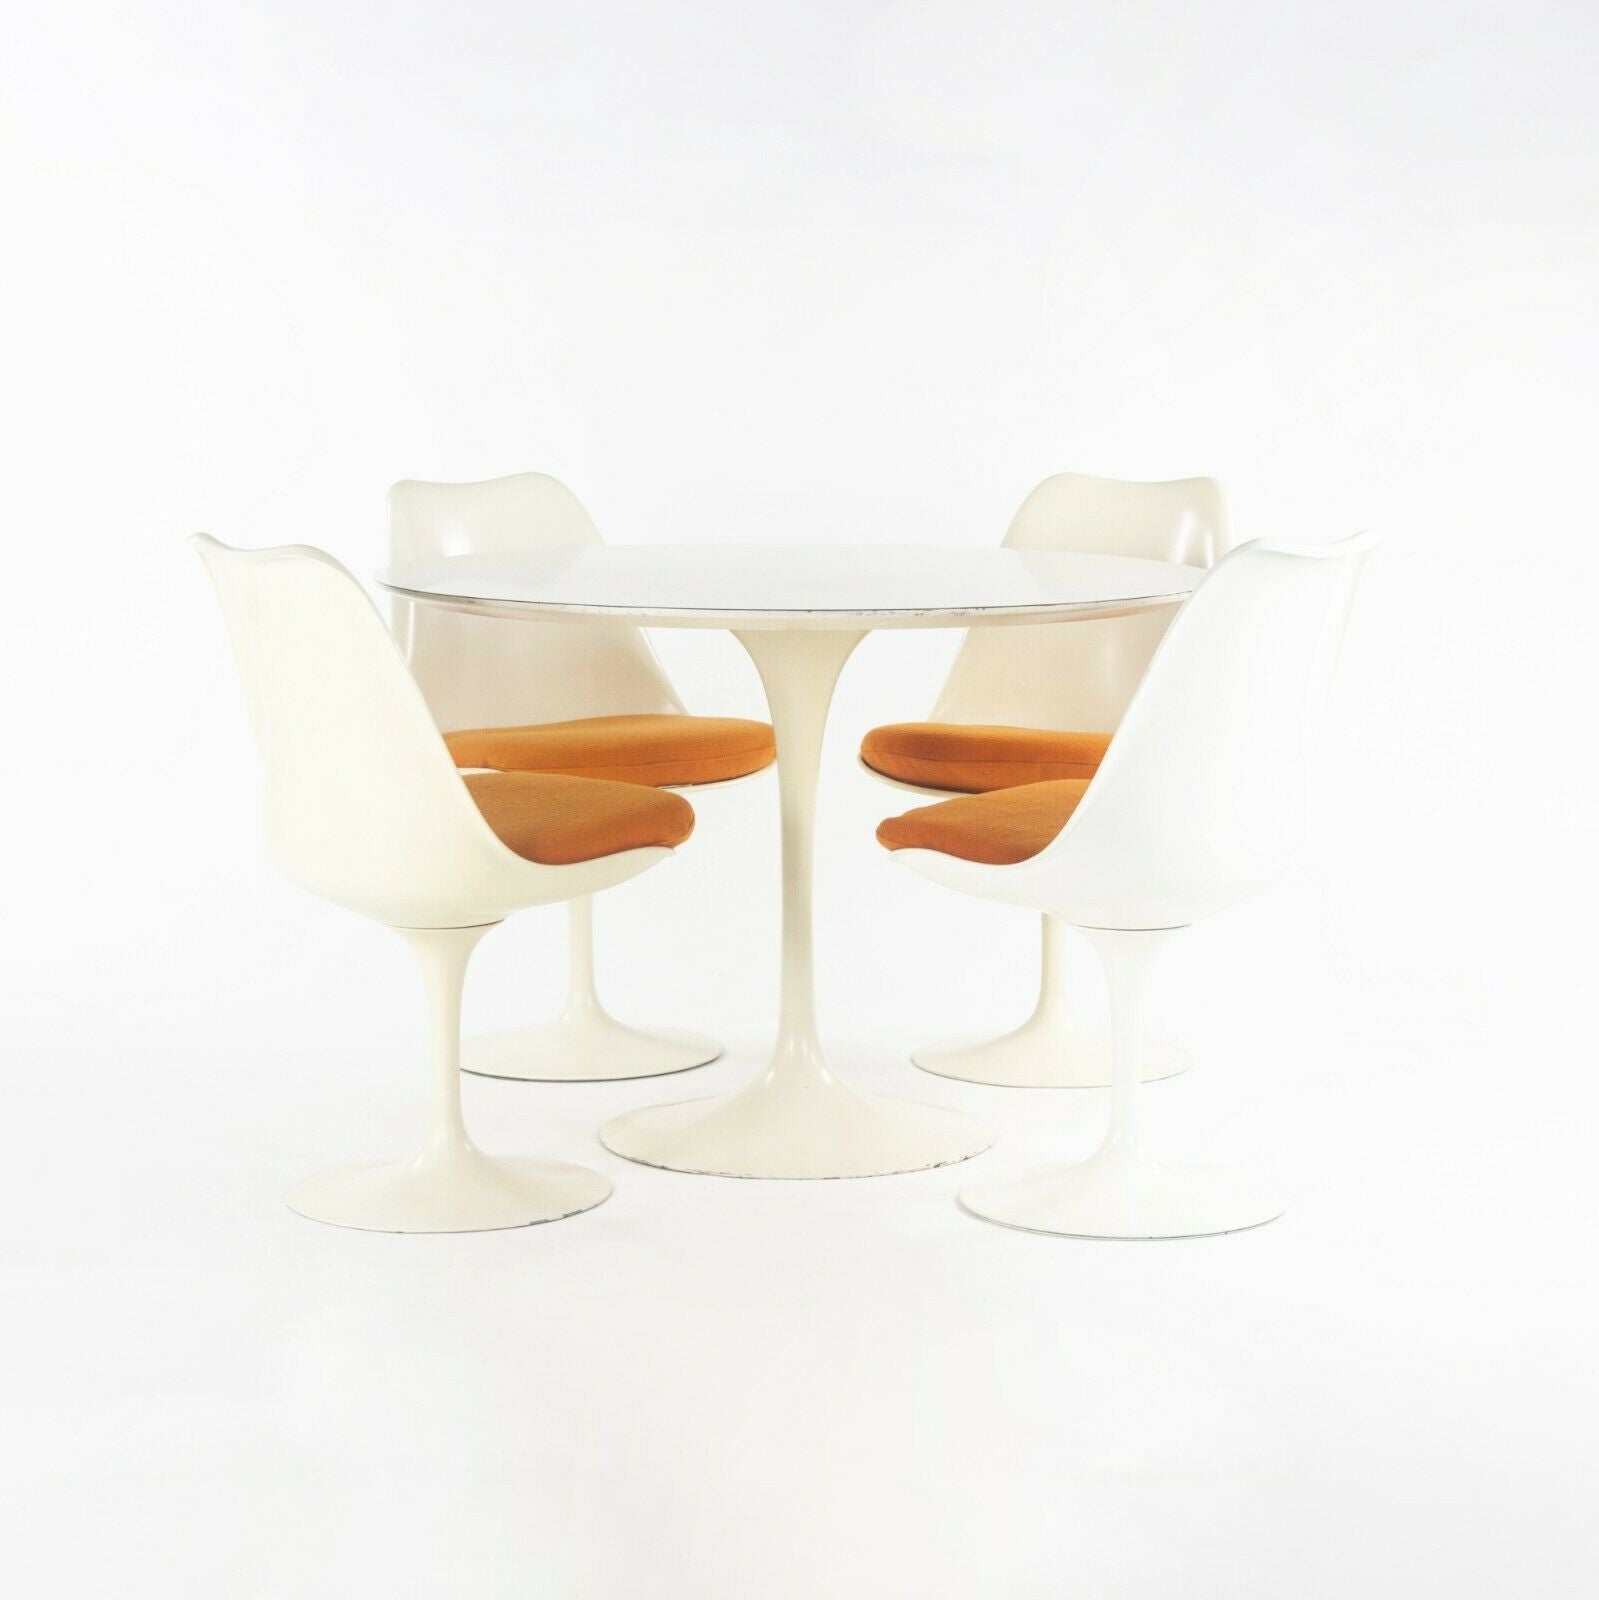 1960s Eero Saarinen for Knoll Tulip Dining Table and Four White Tulip Side Chairs